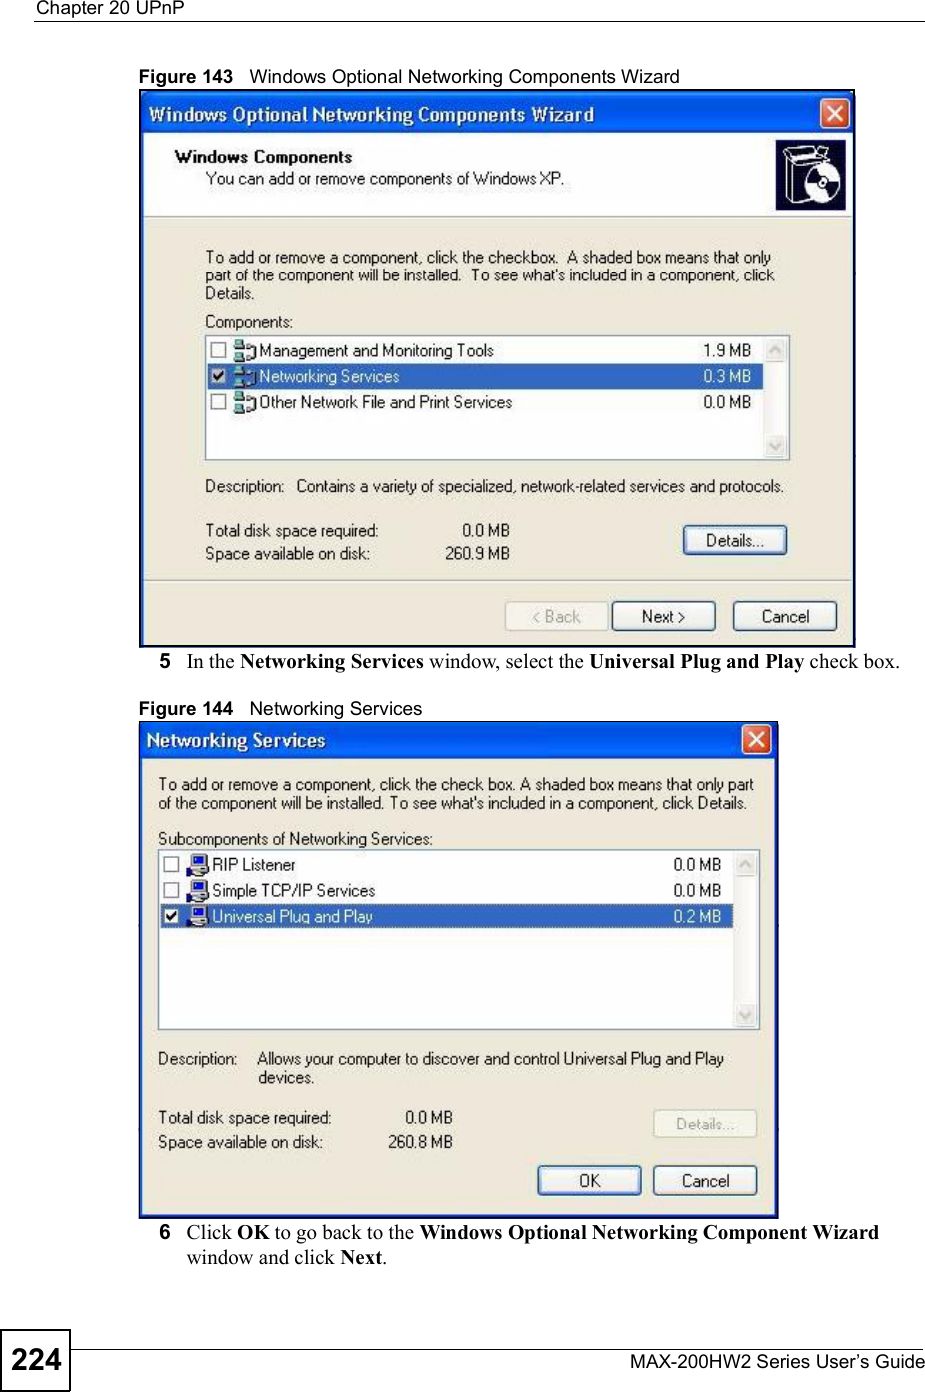 Chapter 20UPnPMAX-200HW2 Series User s Guide224Figure 143   Windows Optional Networking Components Wizard5In the Networking Services window, select the Universal Plug and Play check box. Figure 144   Networking Services6Click OK to go back to the Windows Optional Networking Component Wizard window and click Next.